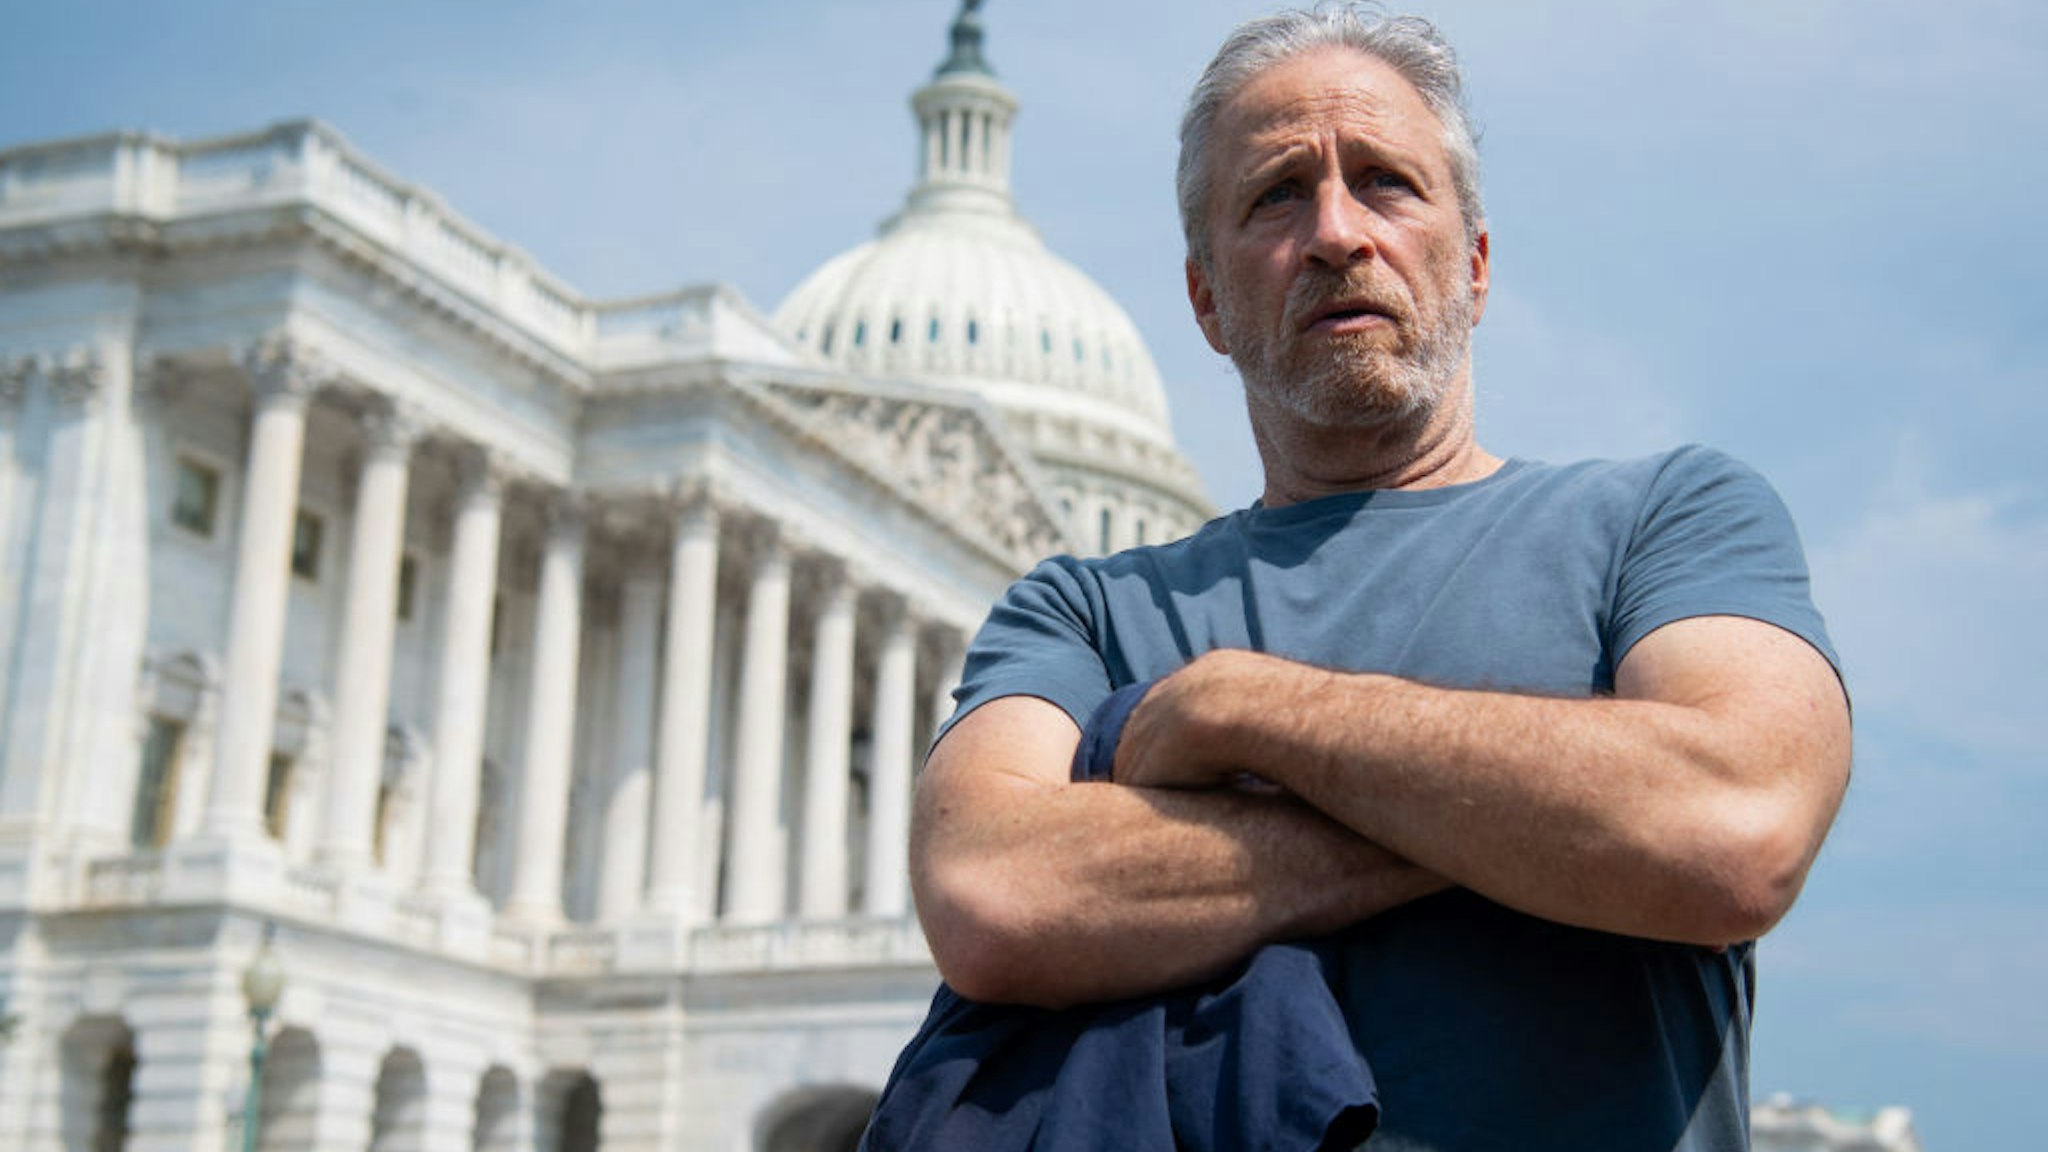 Actor and comedian Jon Stewart attends a press conference by members of the US House unveiling the "Honoring our Promise to Address Comprehensive Toxics Act of 2021's legislation, dealing with the effects caused by exposure to toxic substances during military service by veterans, outside the US Capitol in Washington, DC, May 26, 2021. (Photo by SAUL LOEB / AFP) (Photo by